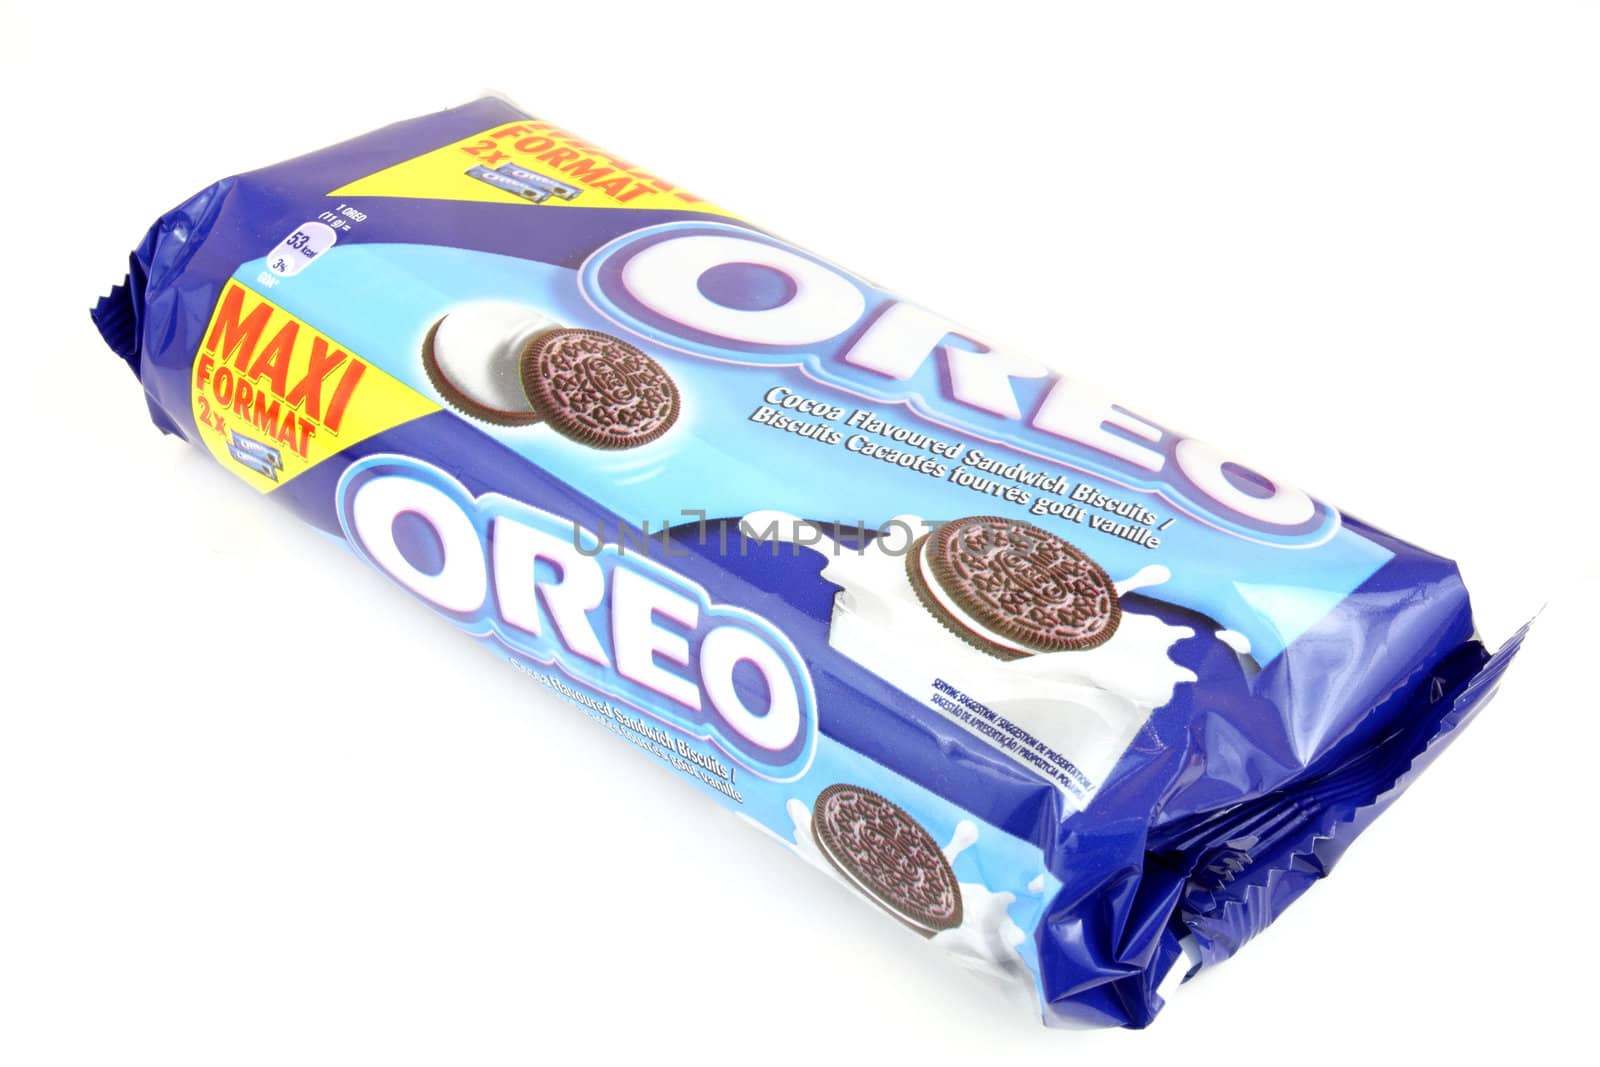 BYTOM, POLAND - MAY 20: Oreo cookies, famous brand owned by Kraft Foods, the largest food corporation based in the US.